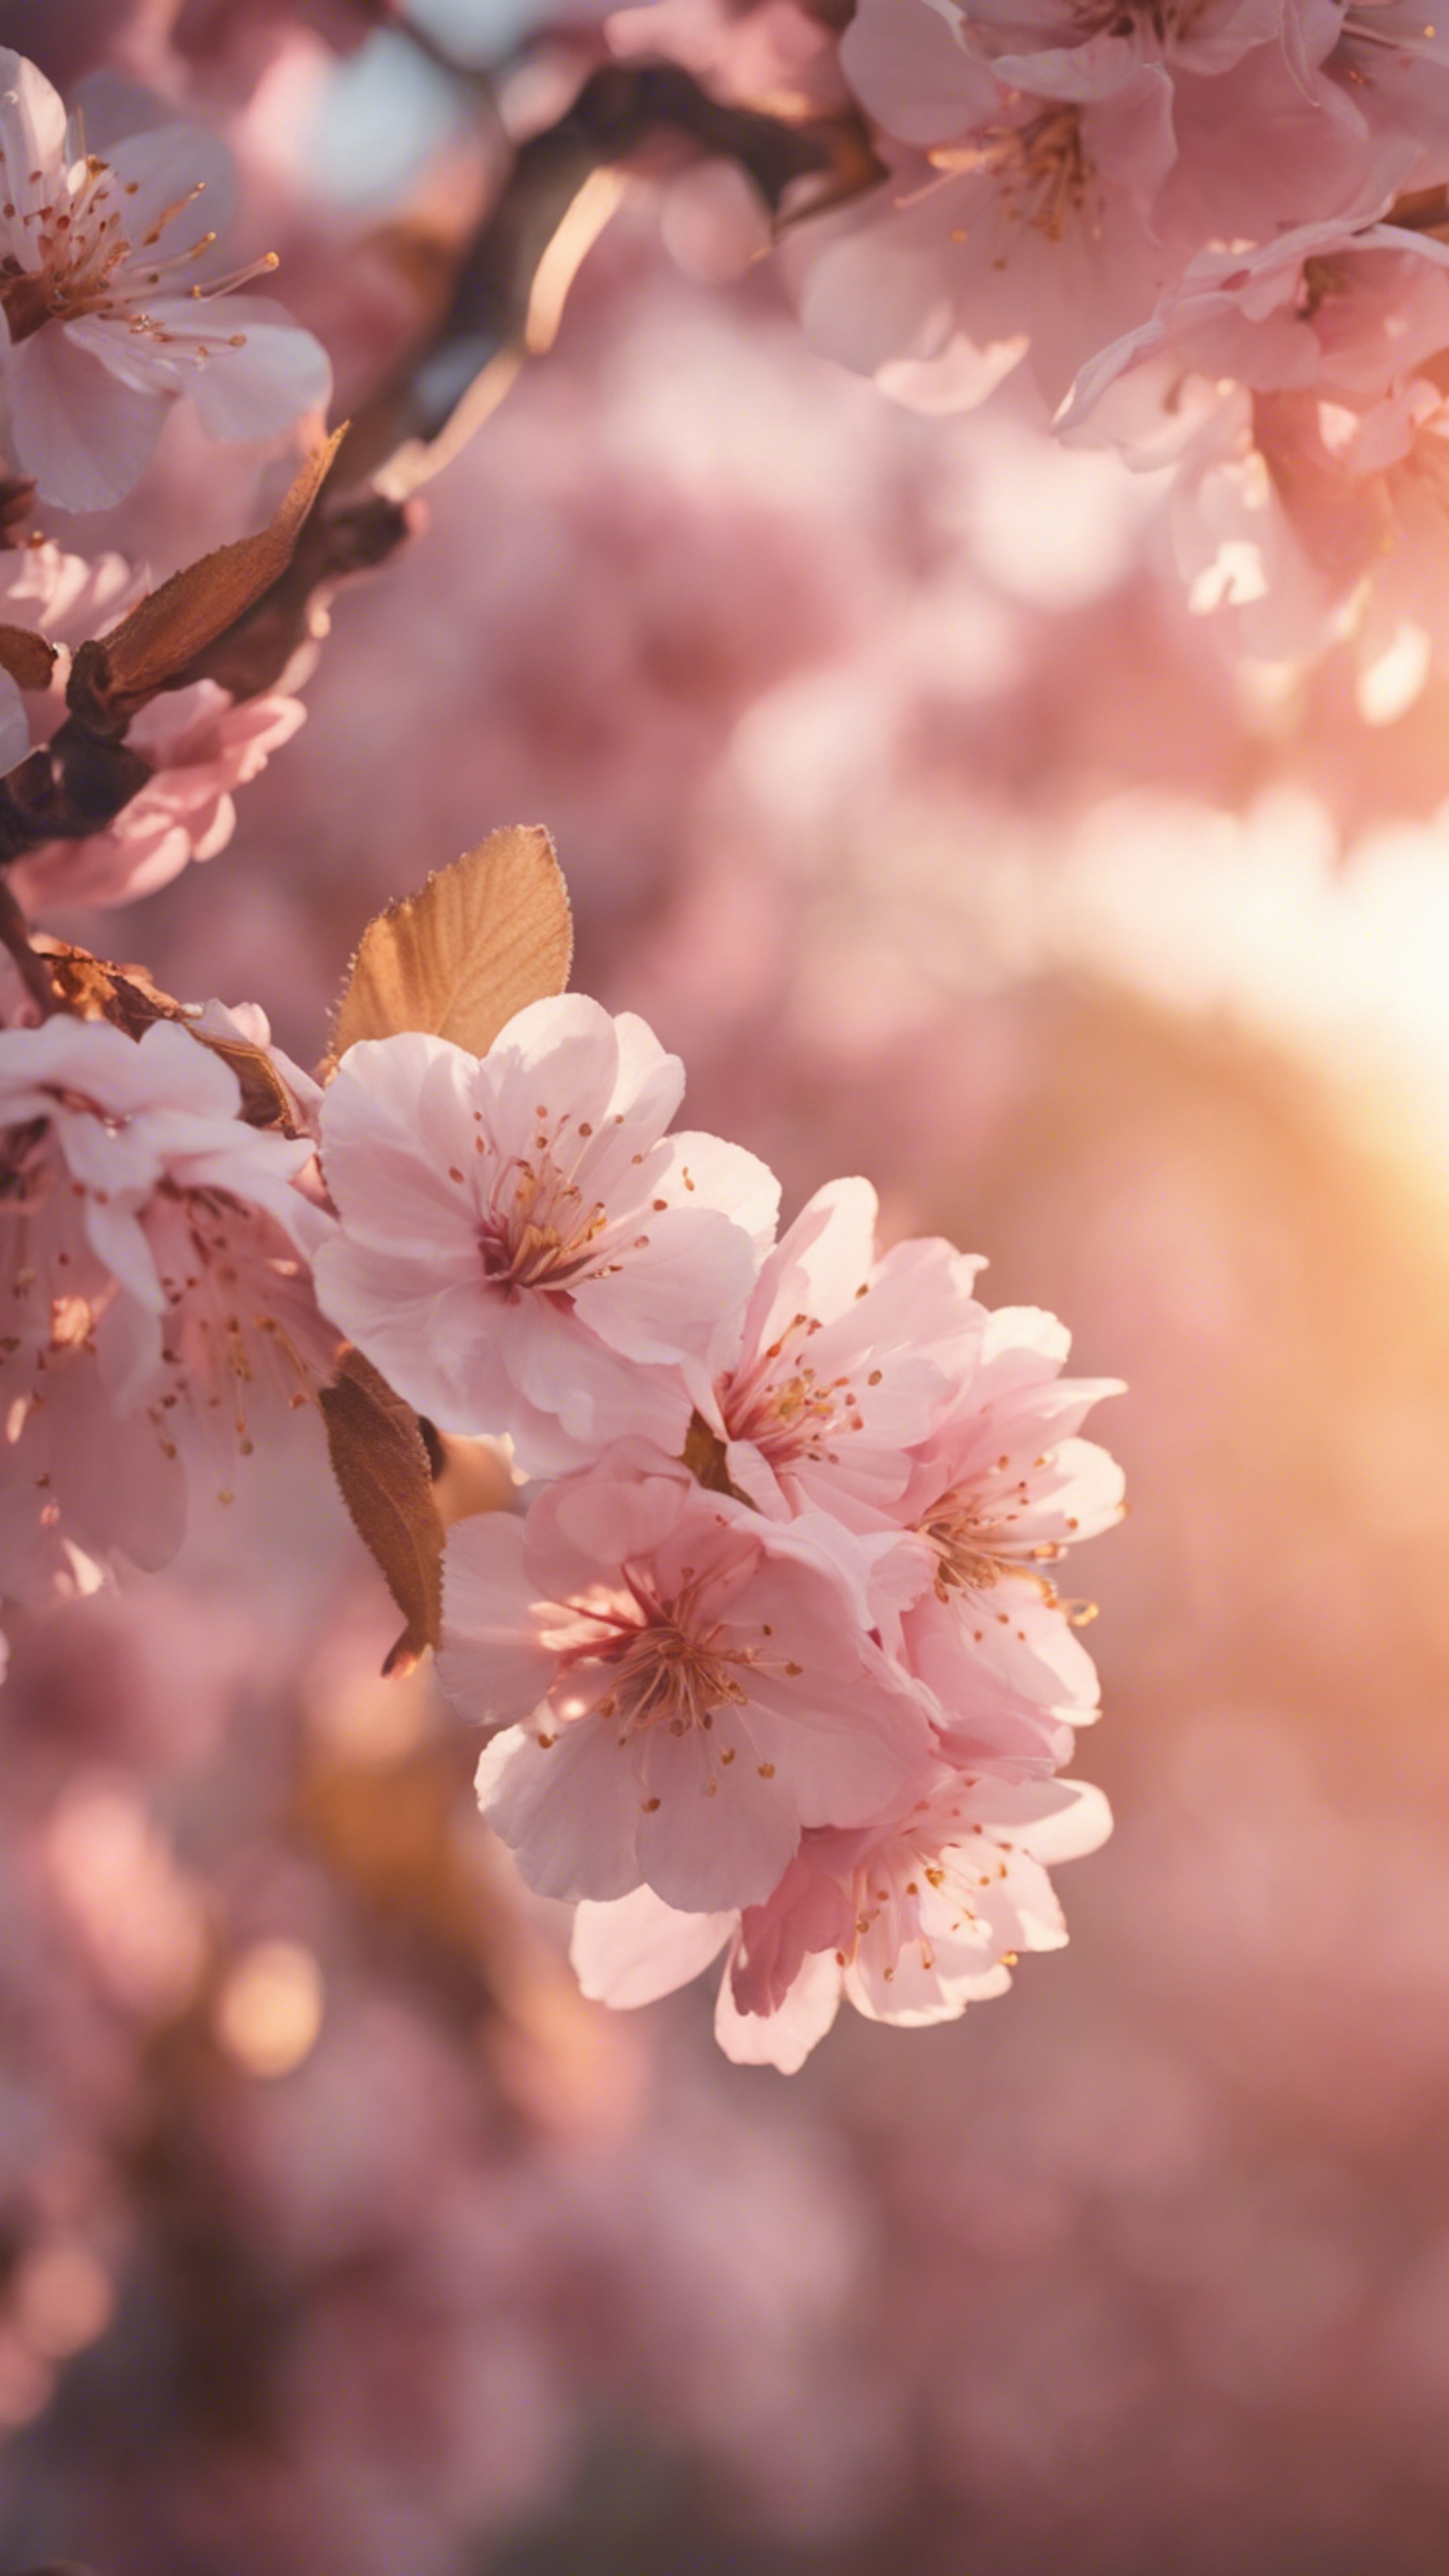 A delicate pink cherry blossom tree with gold leaves against a soft sunset. Wallpaper[63878b5c392143fbba4e]